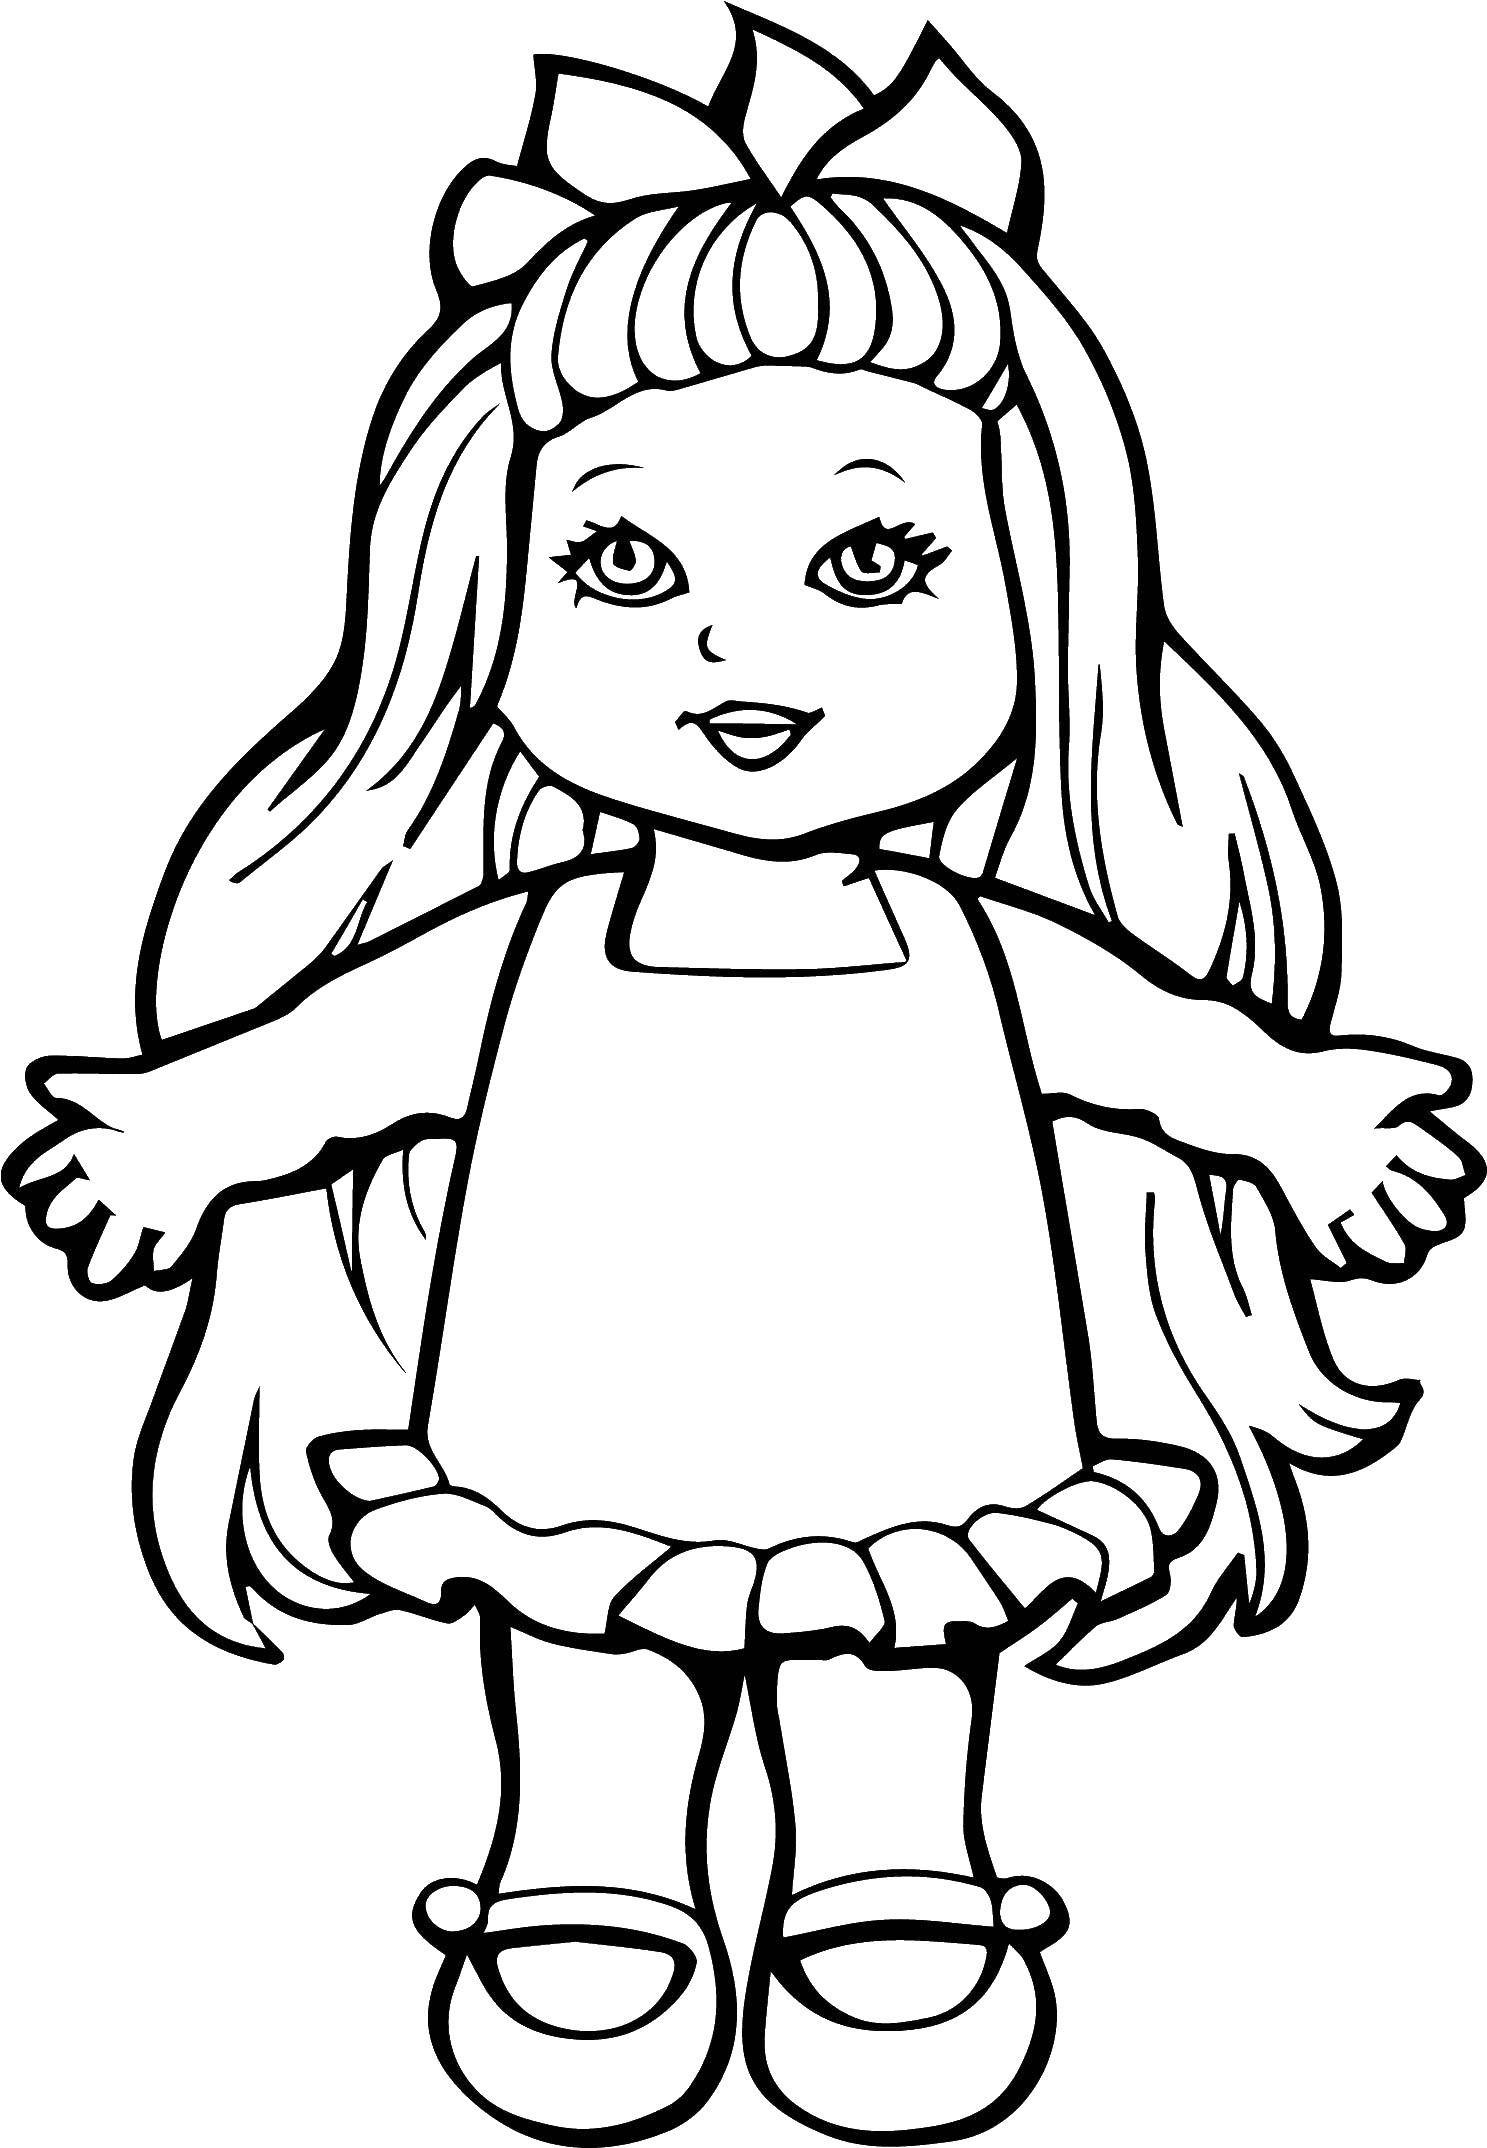 Coloring Doll with long hair. Category The contour of the doll . Tags:  Doll, fashionista, fashion.